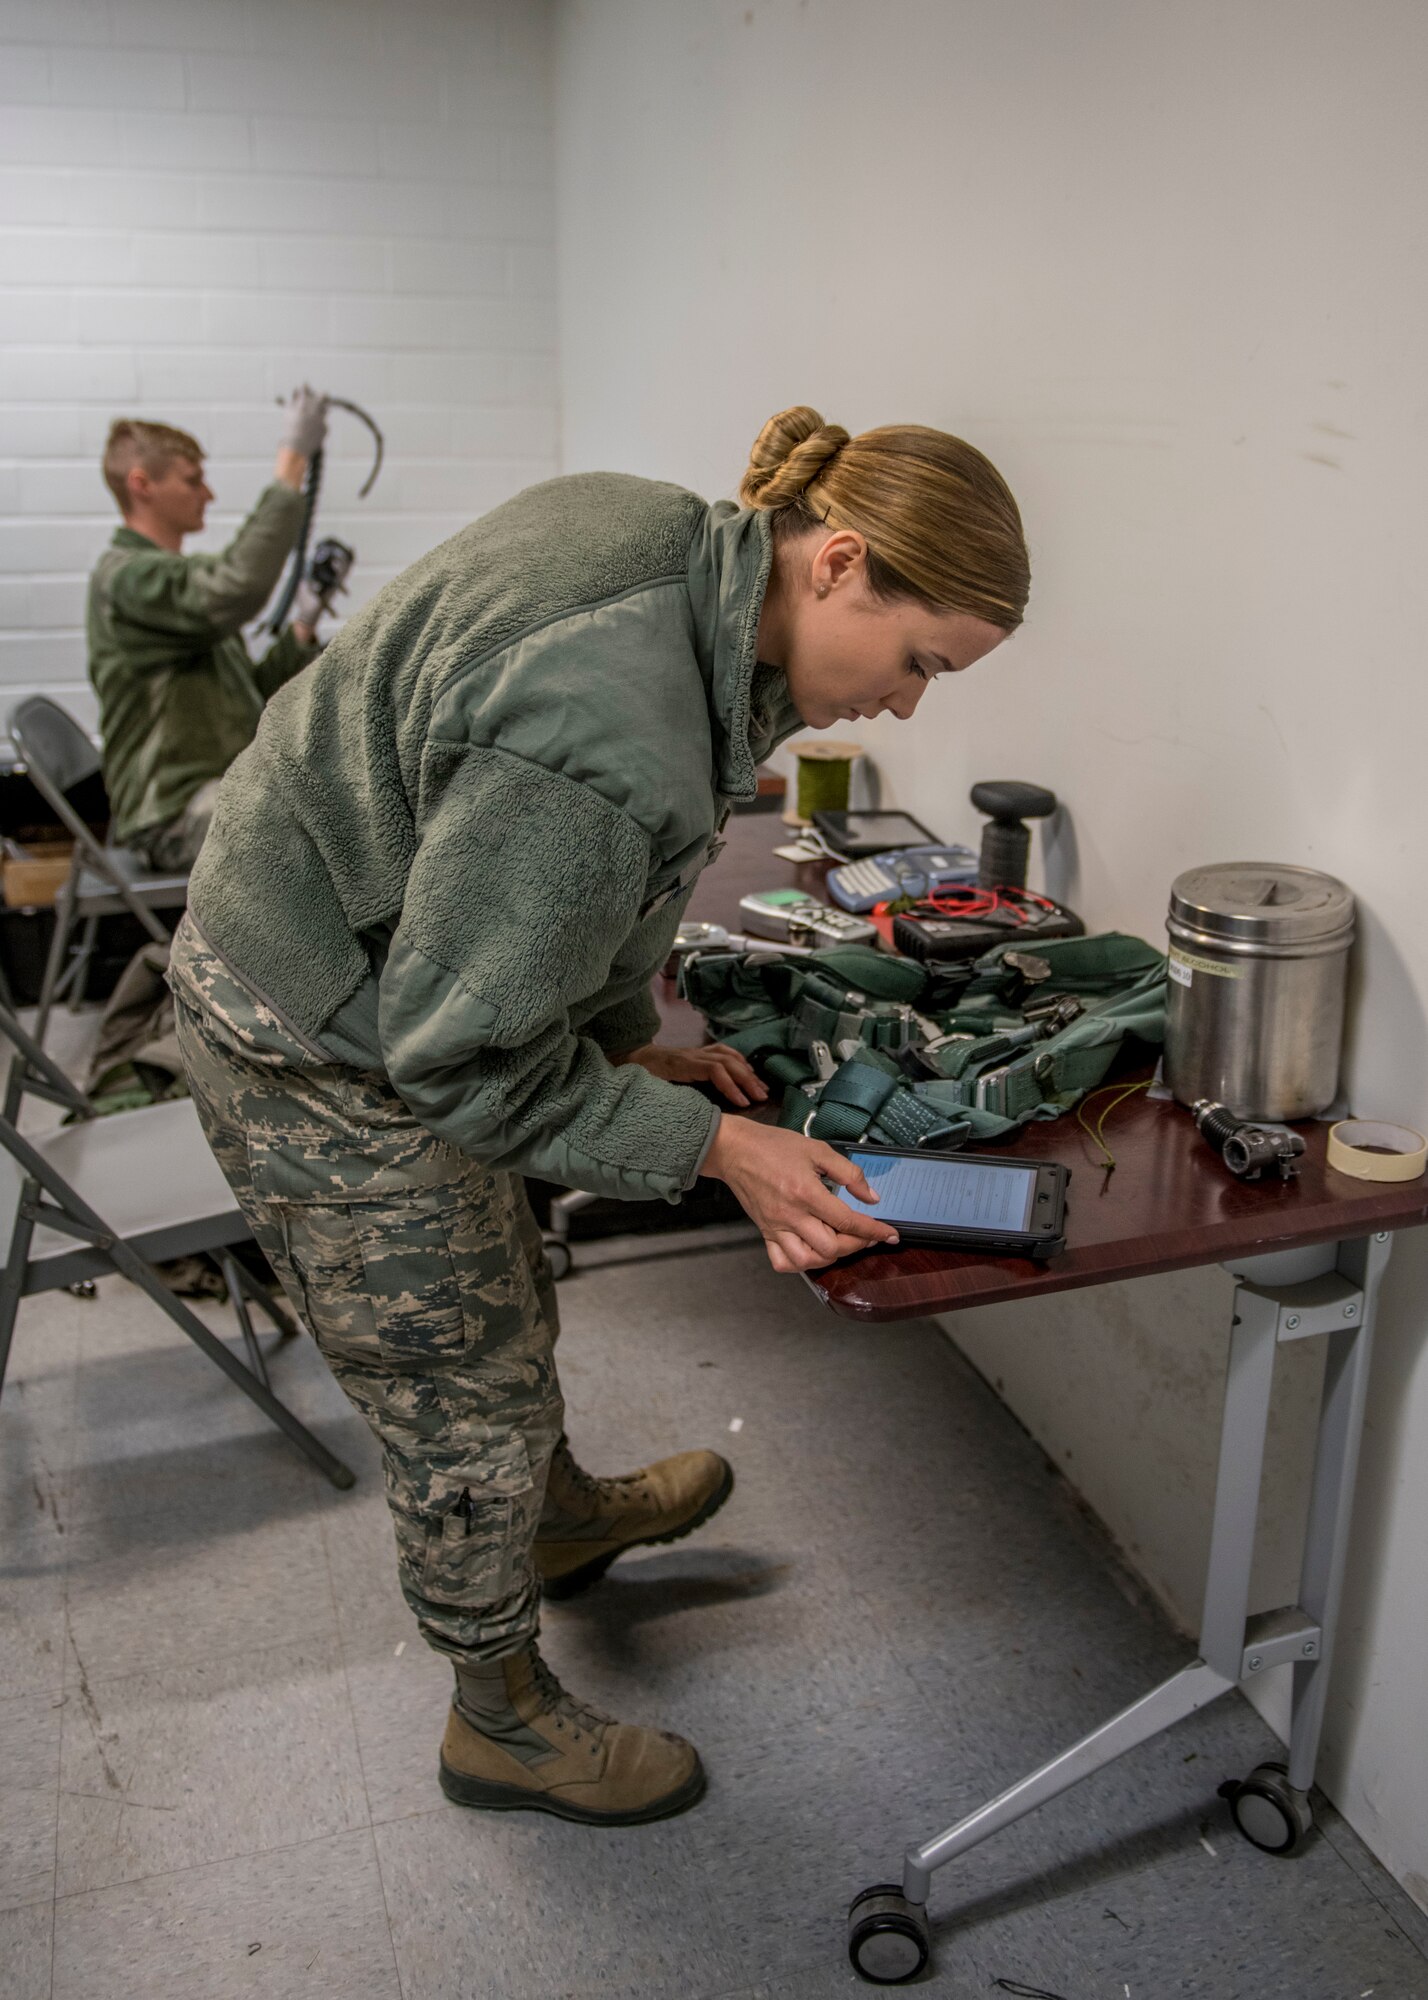 U.S. Air Force Airman Samantha Anderson, 54th Operations Support Squadron Aircrew Flight Equipment apprentice, reads a technical order, April 11, 2019, at Naval Air Station Joint Reserve Base New Orleans, La. AFE spent over two weeks preparing the gear that was used during the temporary duty station. (U.S. Air Force photo by Airman 1st Class Kindra Stewart)